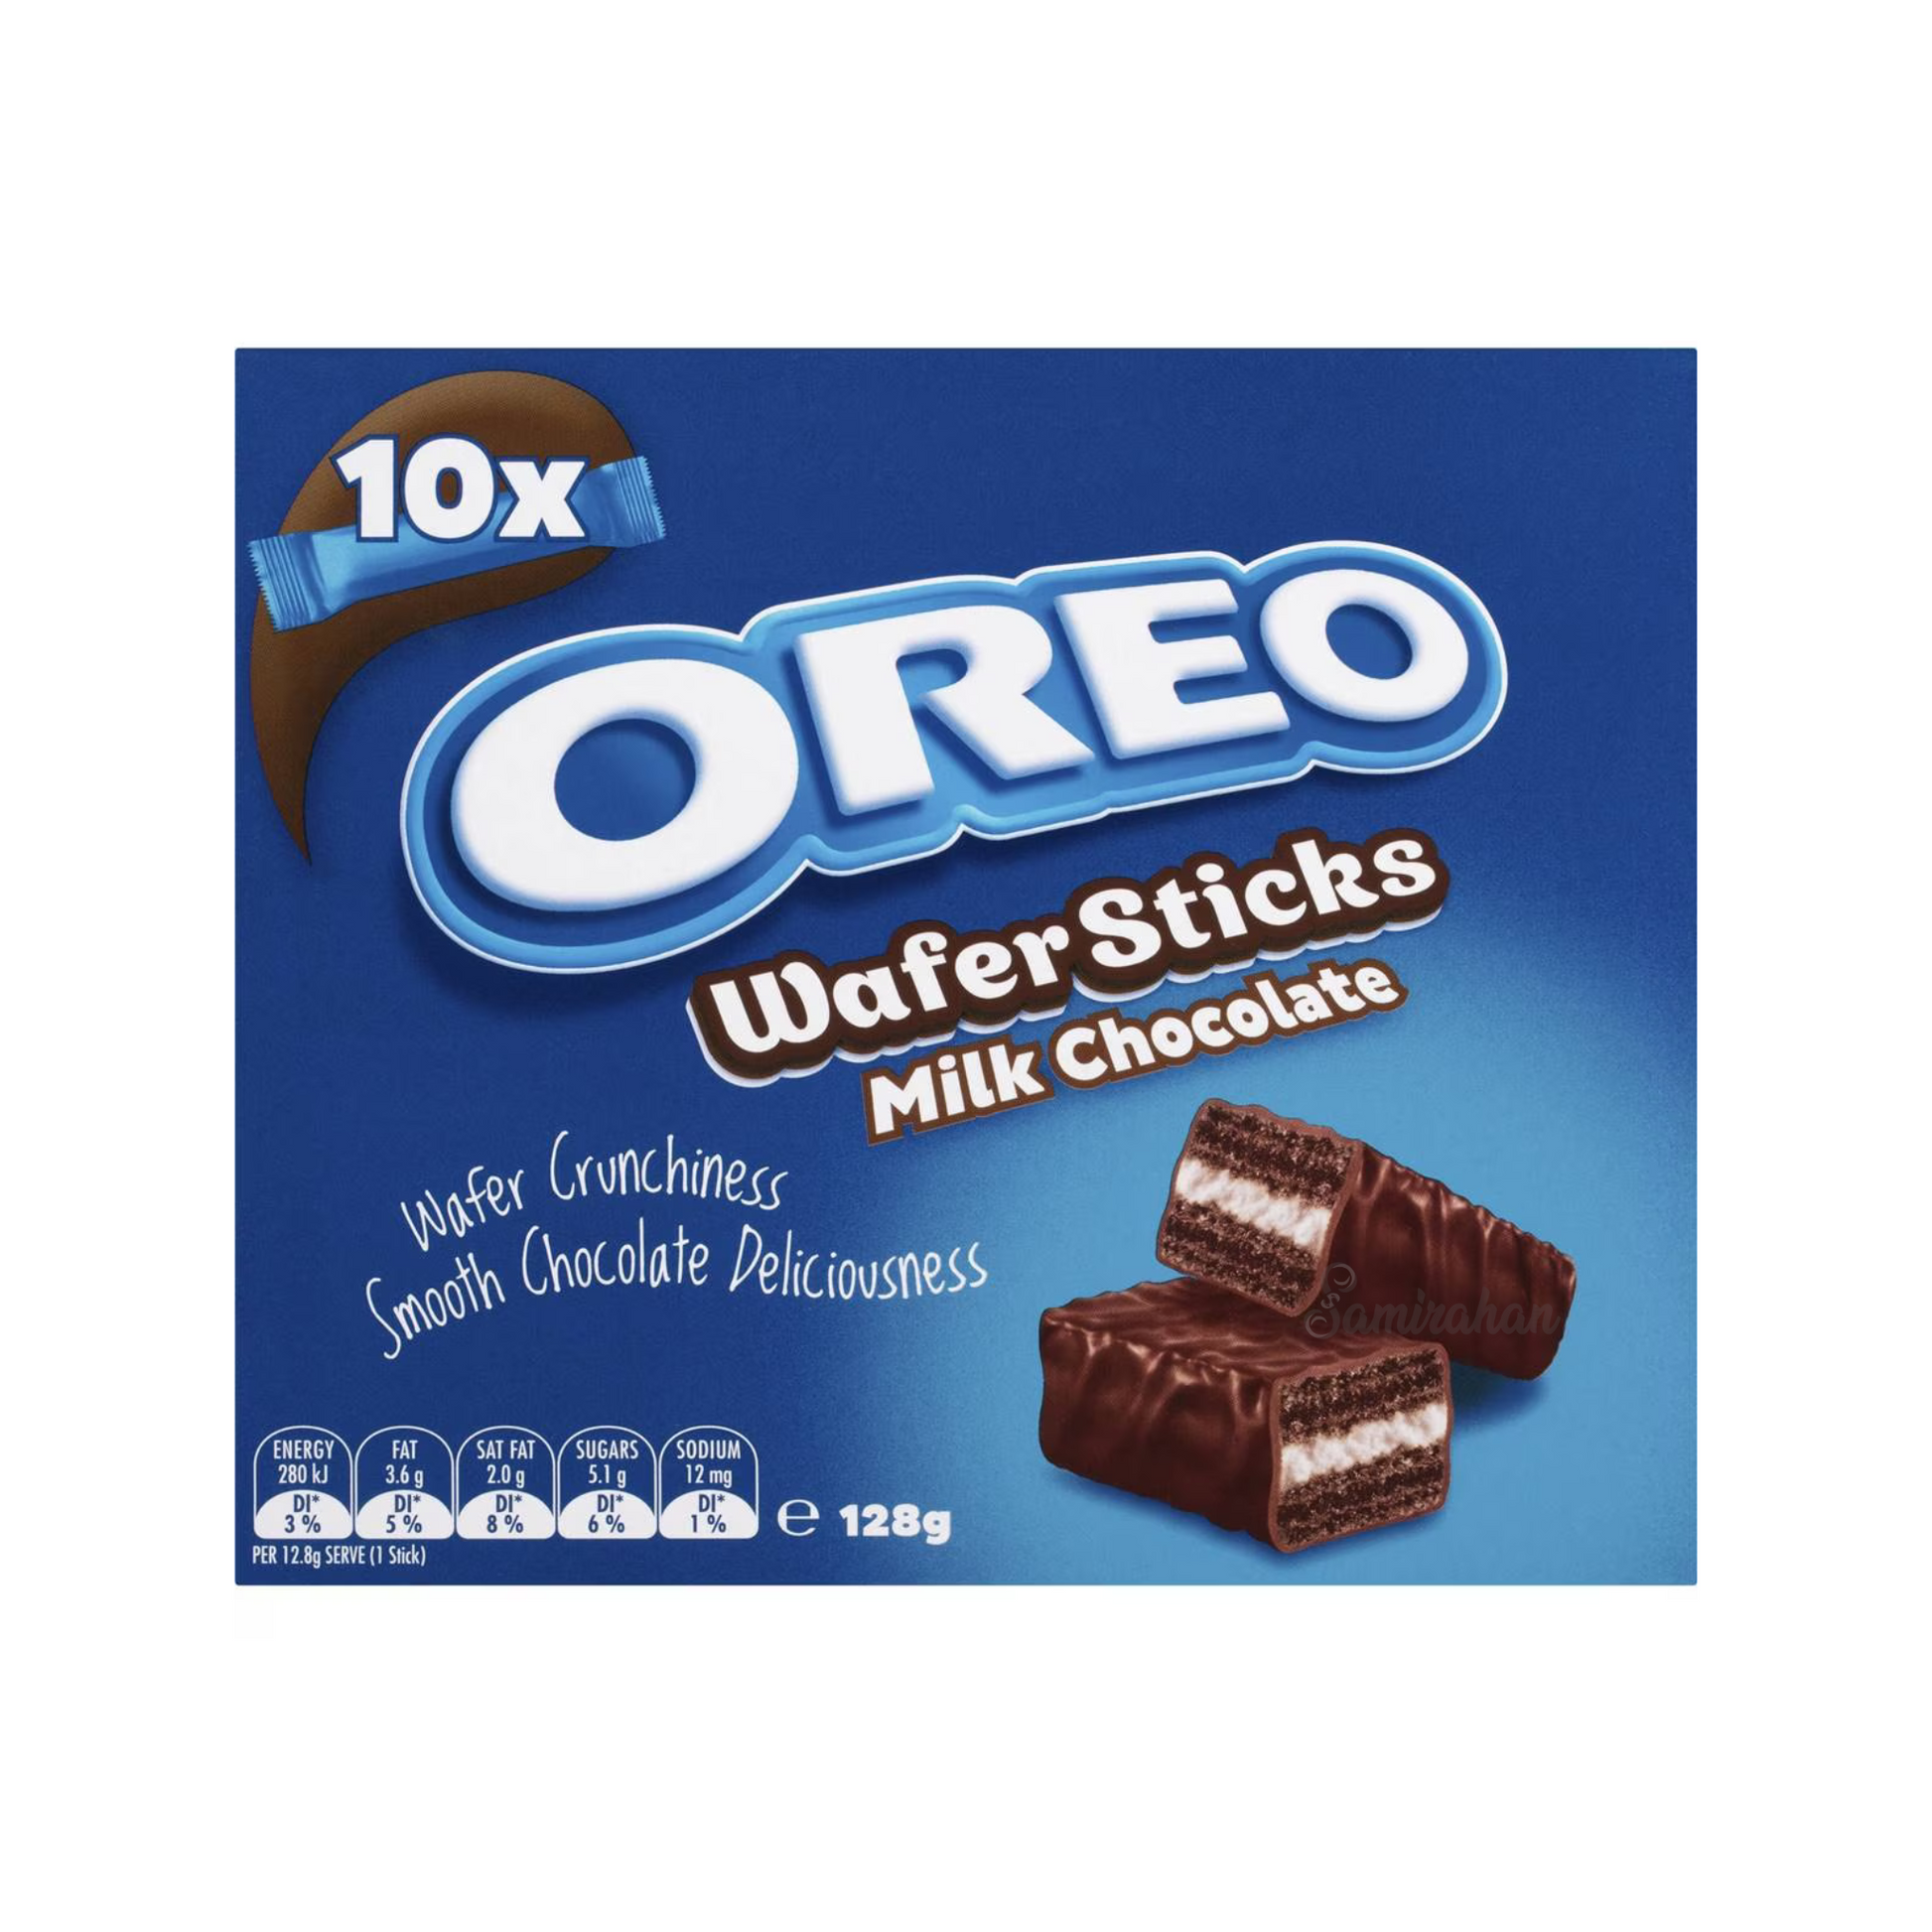 Oreo Milk Chocolate Wafer Stick Biscuits are OREO Wafer Sticks, enrobed with delicious Milk Chocolate. Halal suitable. Best imported foreign Australian Aussie genuine authentic premium quality sweets cookie biscuit cookies USA American gift idea candy real snack choco cocoa price in Dhaka Chittagong Sylhet Bangladesh.